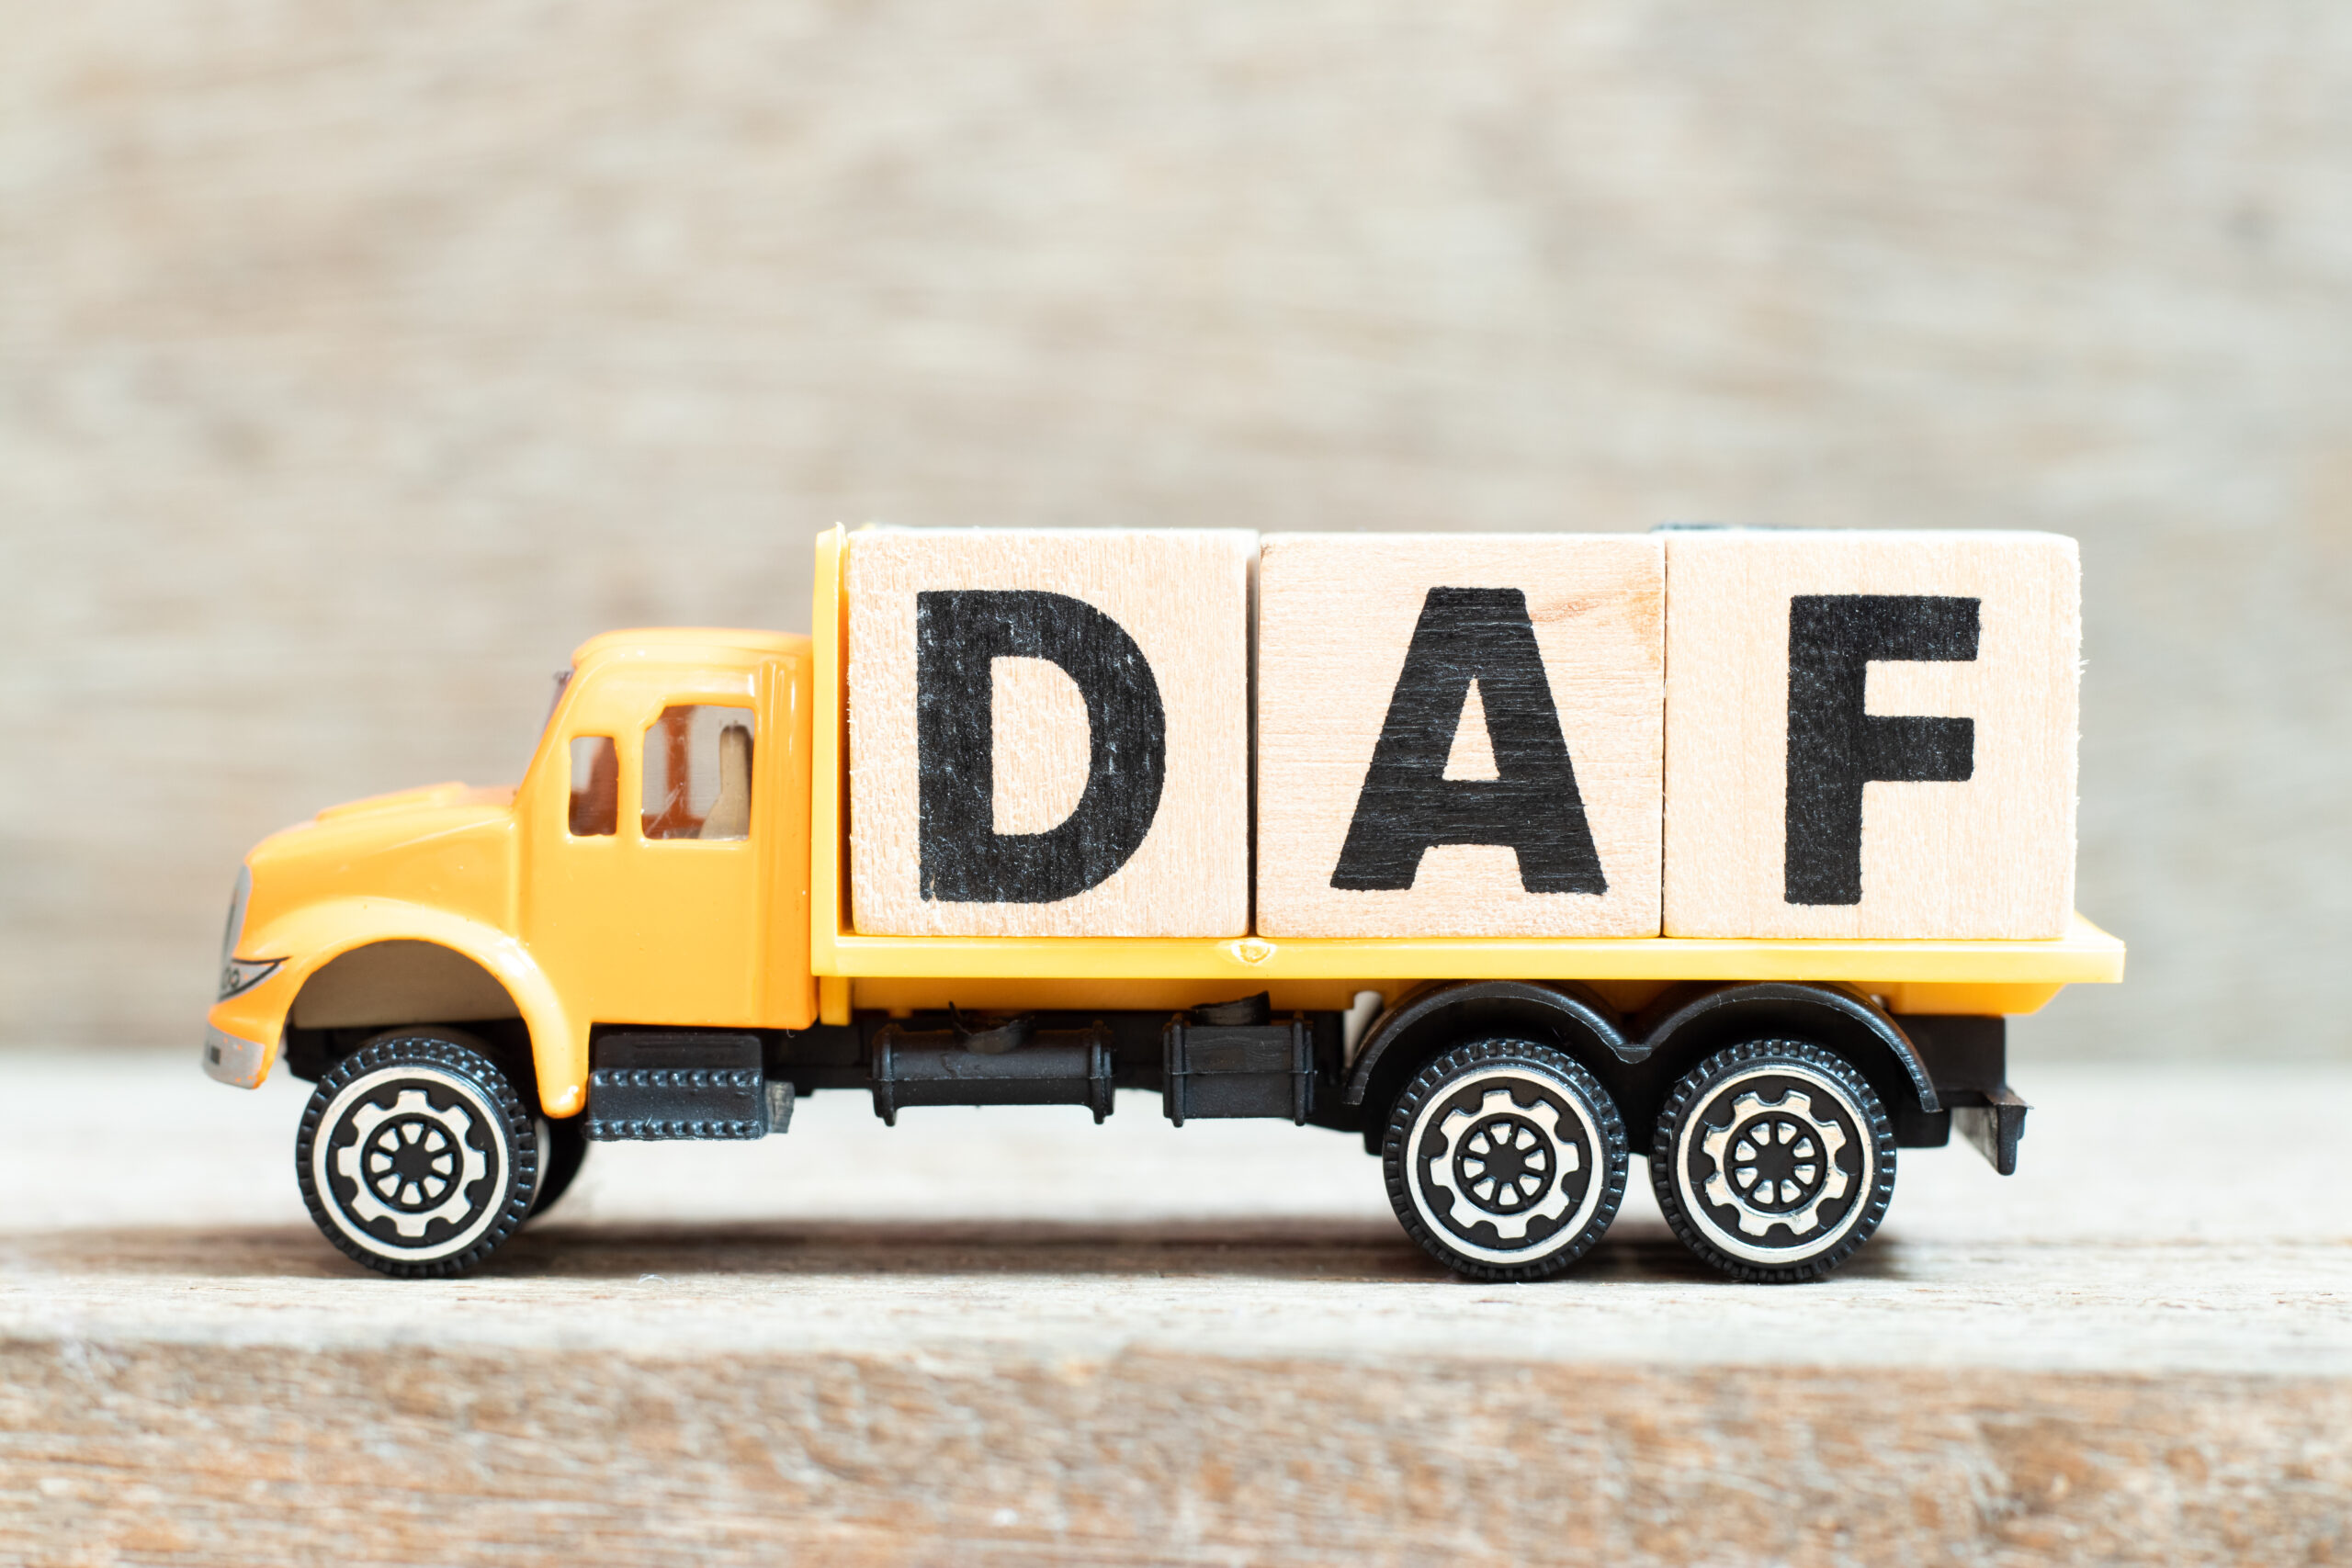 Toy,Truck,Hold,Alphabet,Letter,Block,In,Word,Daf,(abbreviation